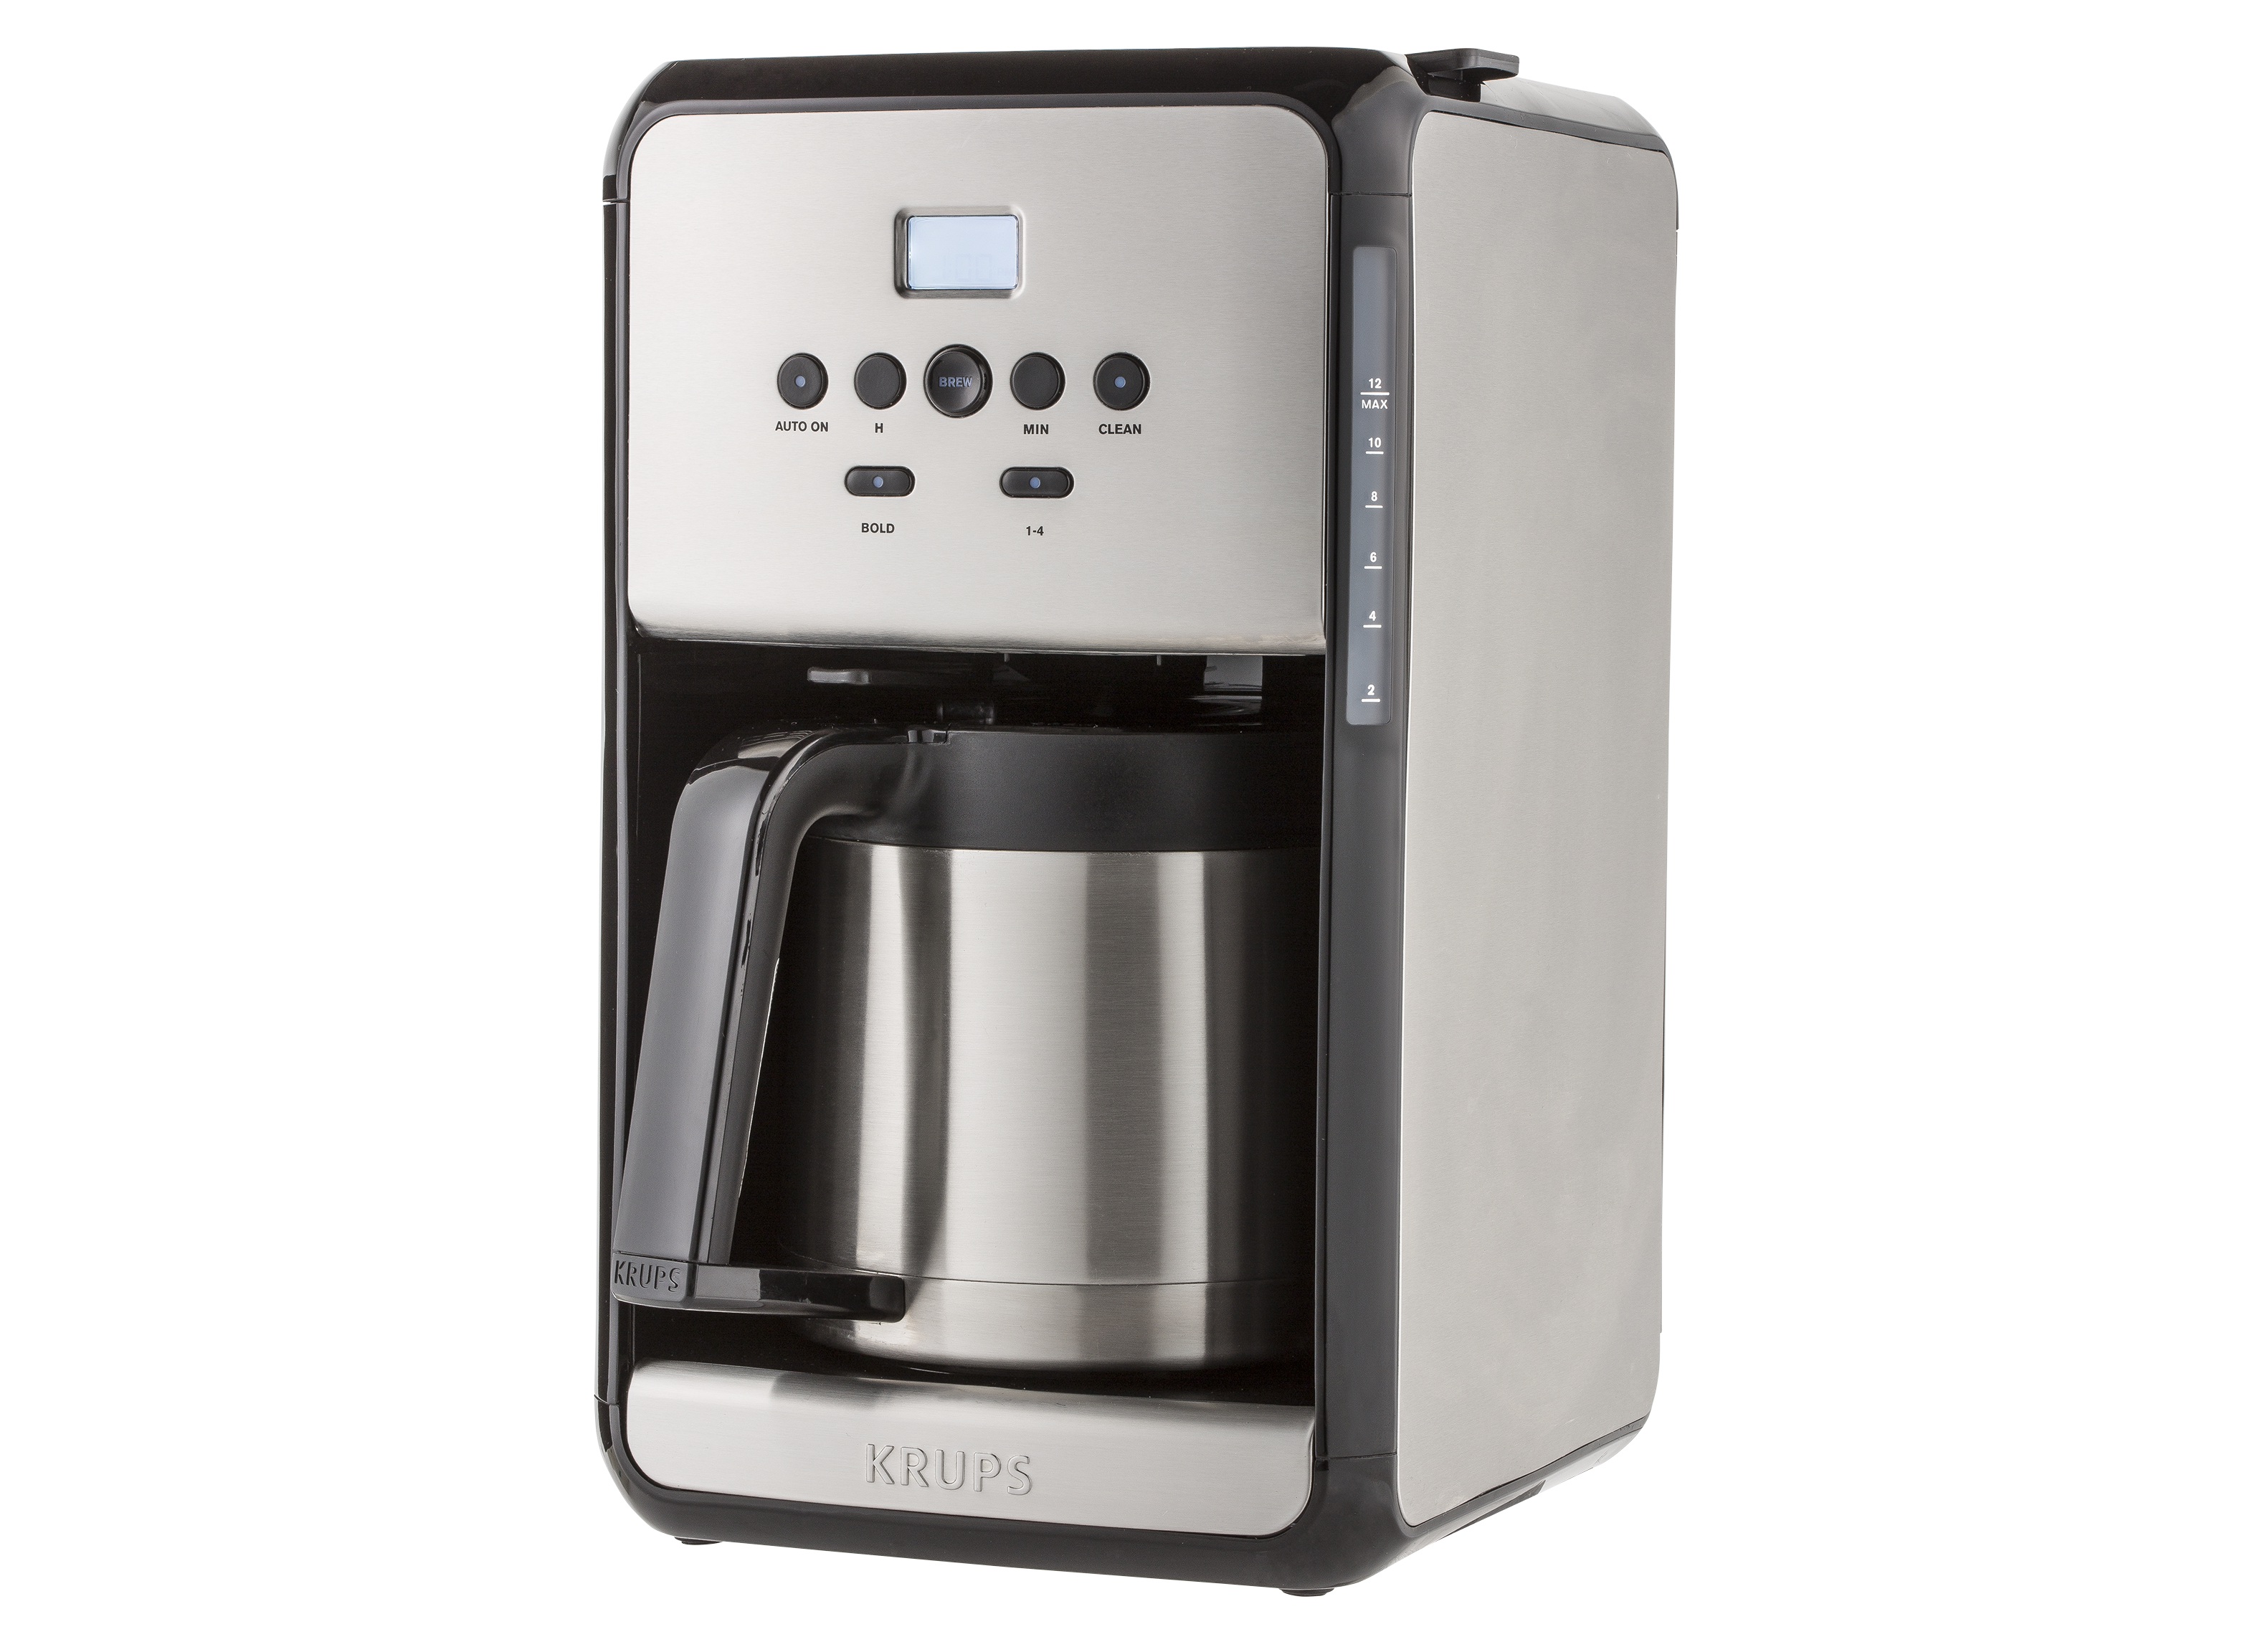 https://crdms.images.consumerreports.org/prod/products/cr/models/388630-coffeemakers-krups-savoyet353050.png